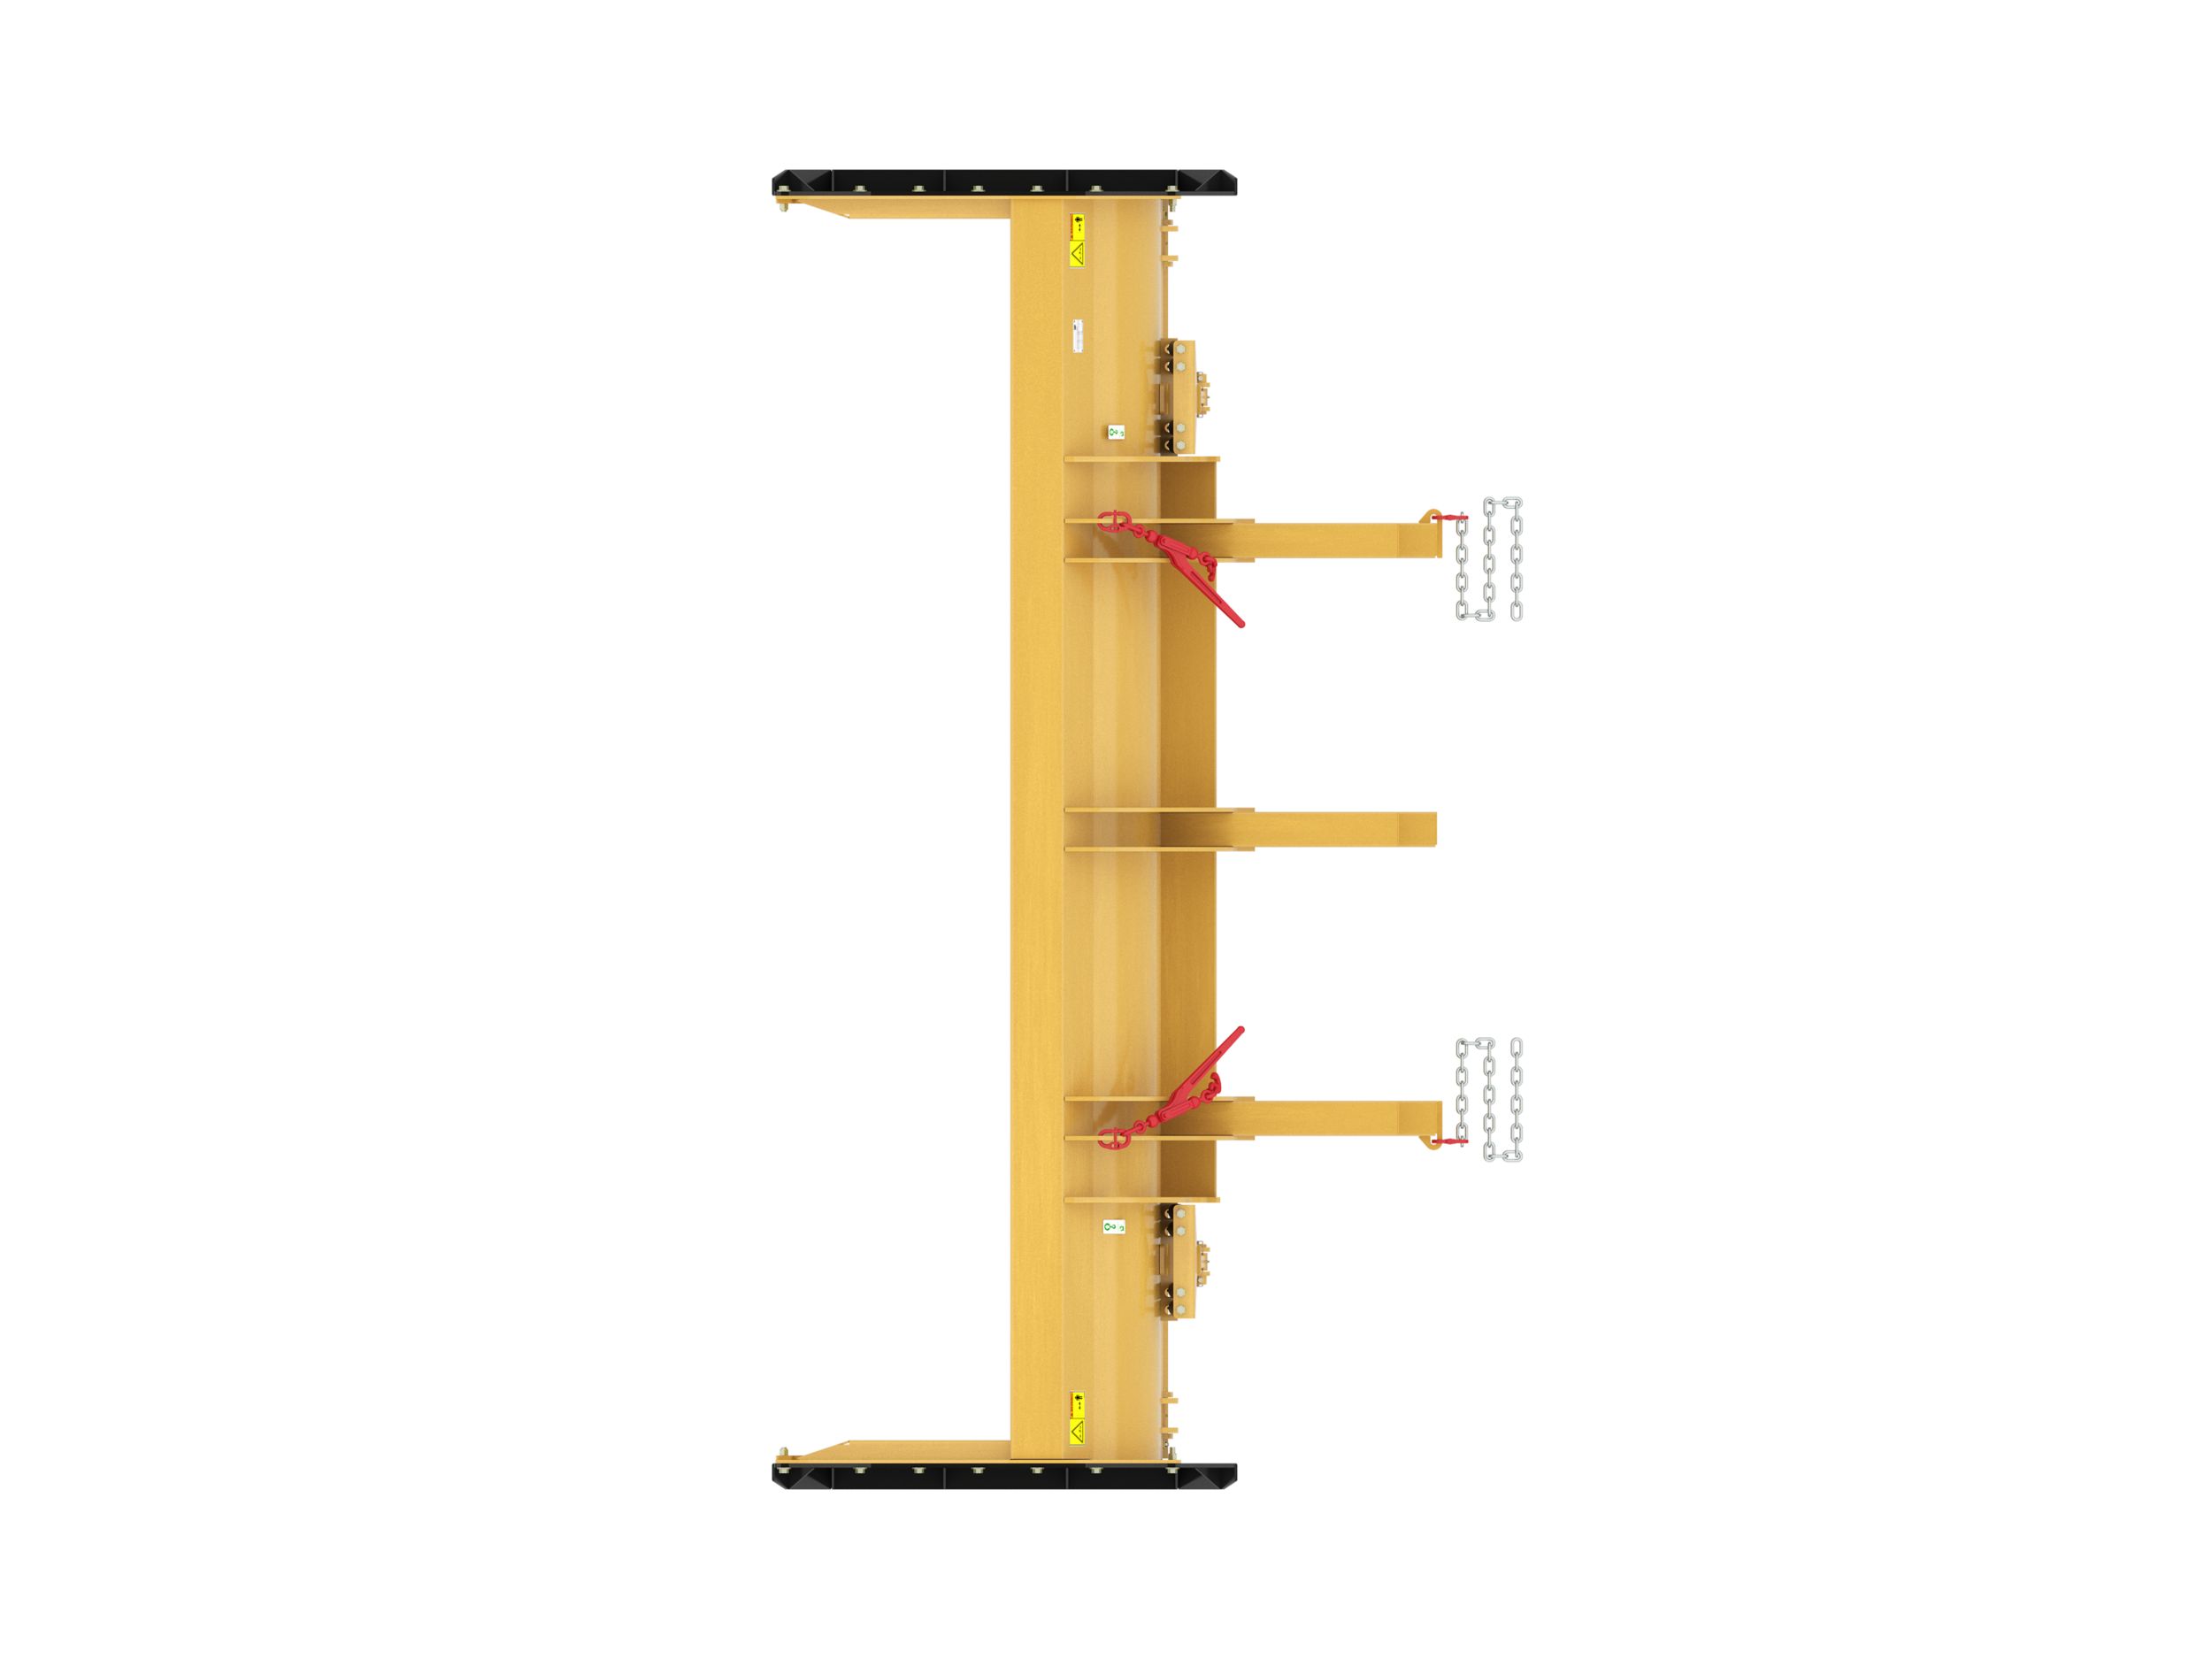 3.66 m (12 ft) Straight Snow Push with rubber with trip edge trip edge